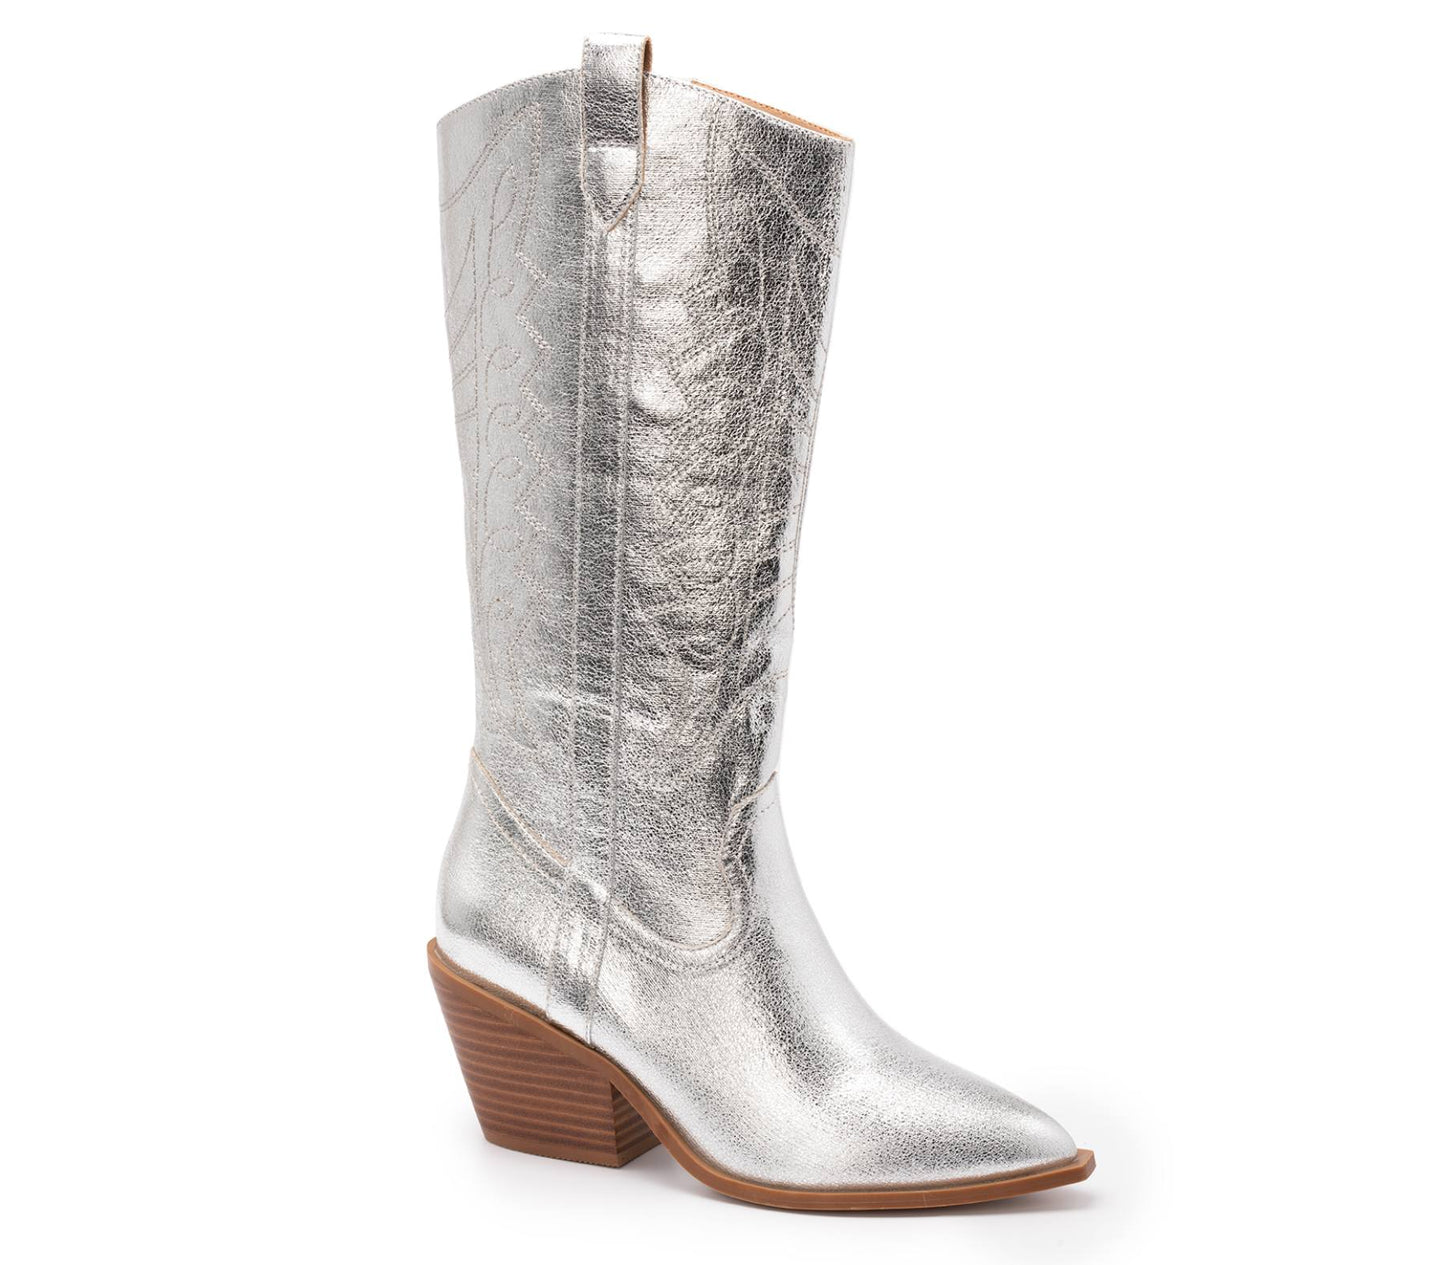 Corkys Howdy Boots in Silver Metallic